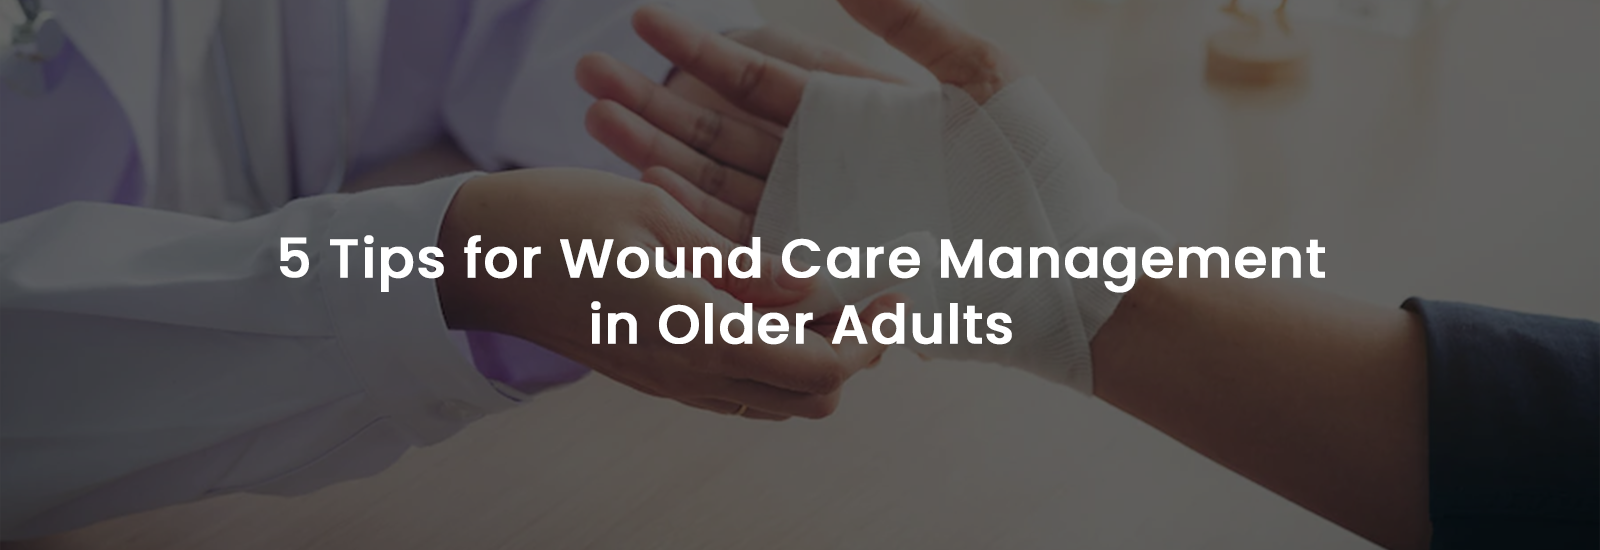 5 Tips for Wound Care Management in Older Adults | Banner Image